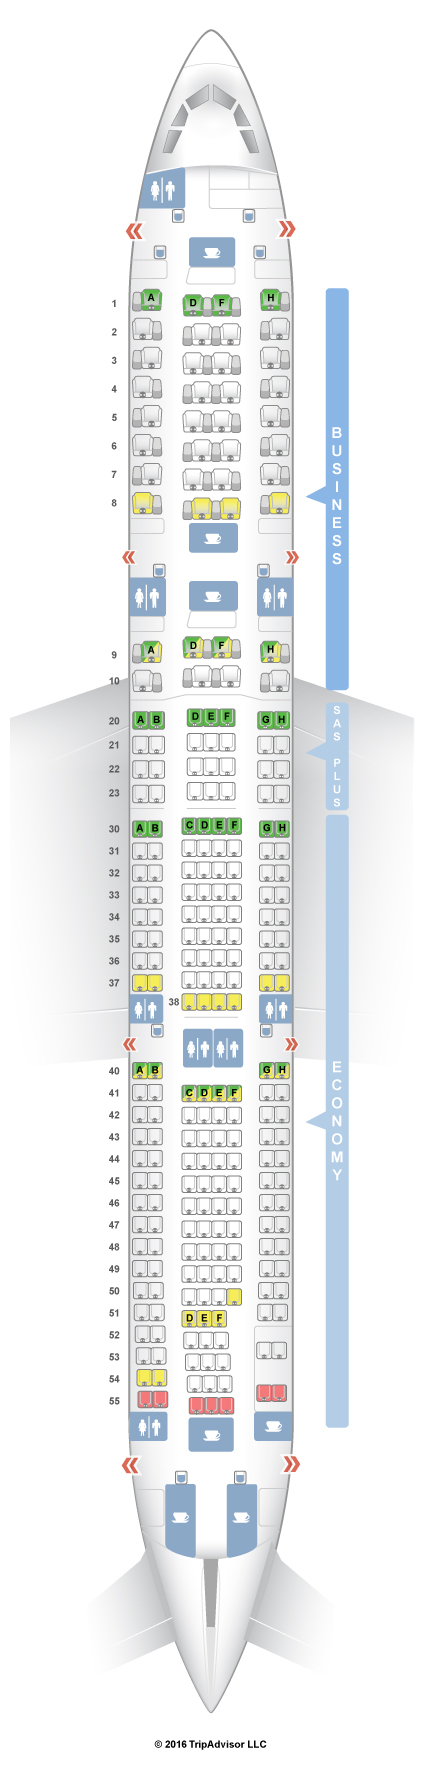 Airbus A340 Jet Seating Chart